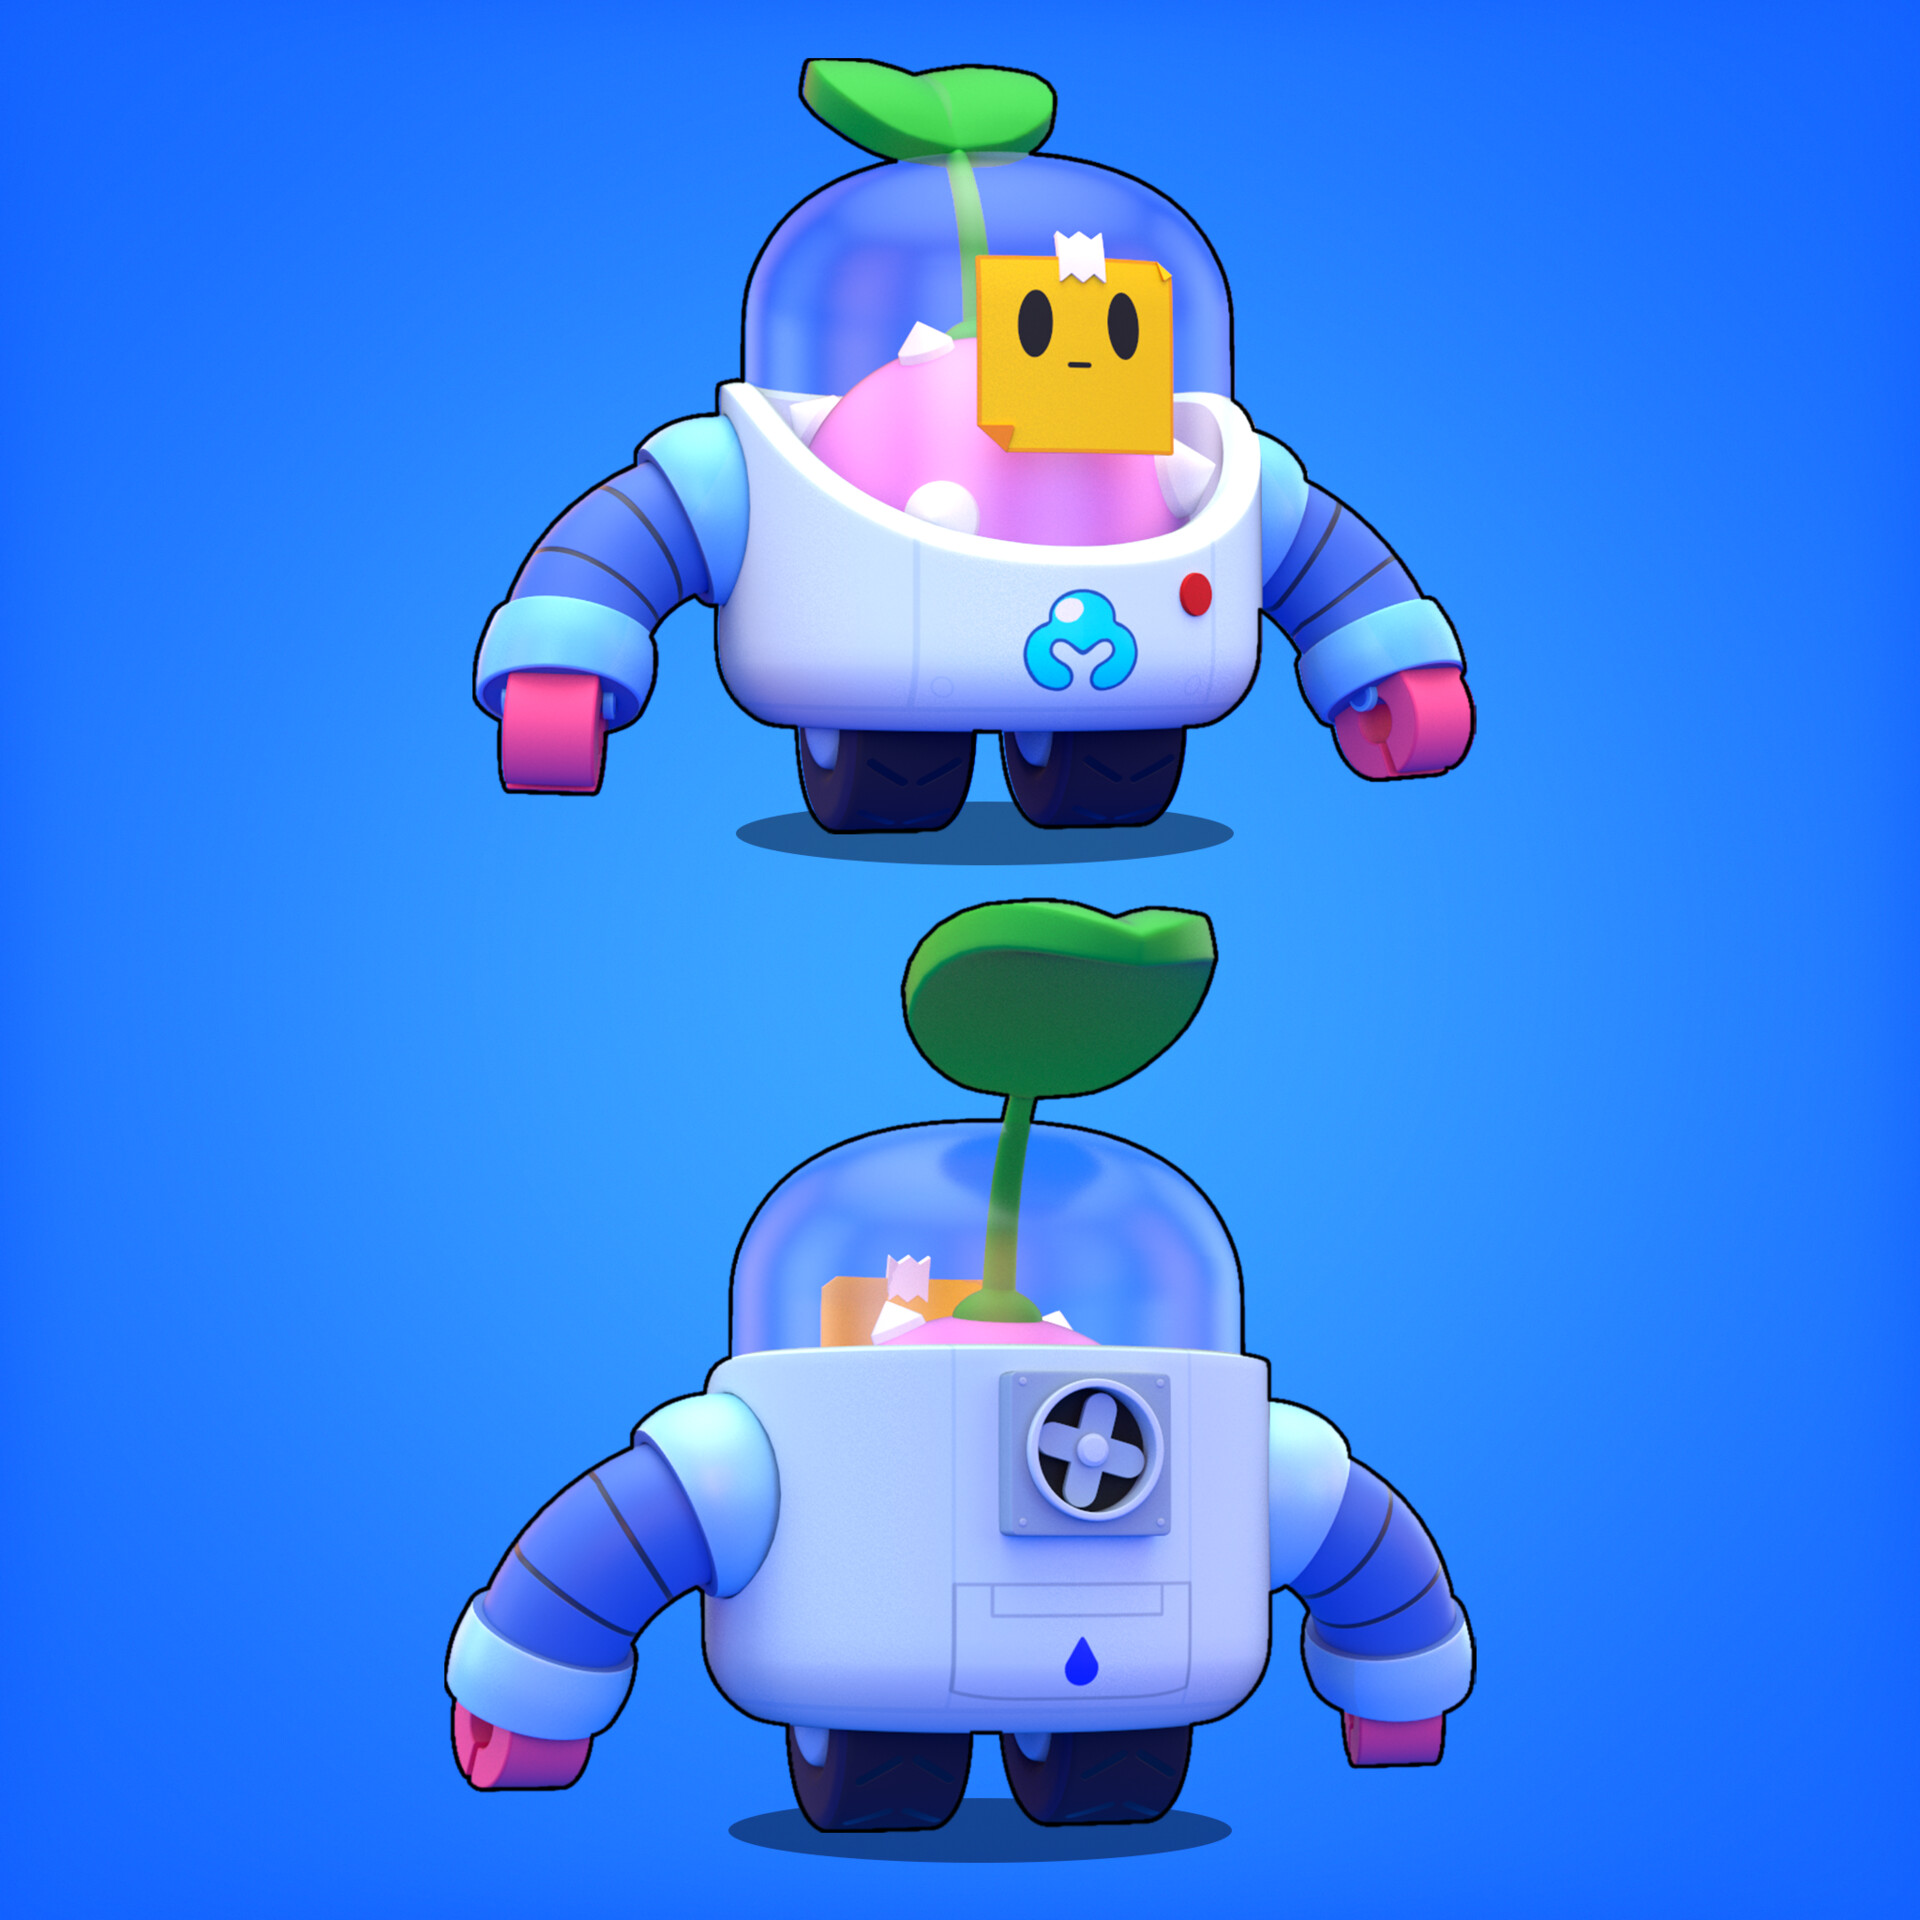 17 Hq Pictures Brawl Stars Sprout Release Sprout Guide Brawl Stars Brawler Attack Super Gadget Tips Byn Xfyc3 - yt brawl stars fr